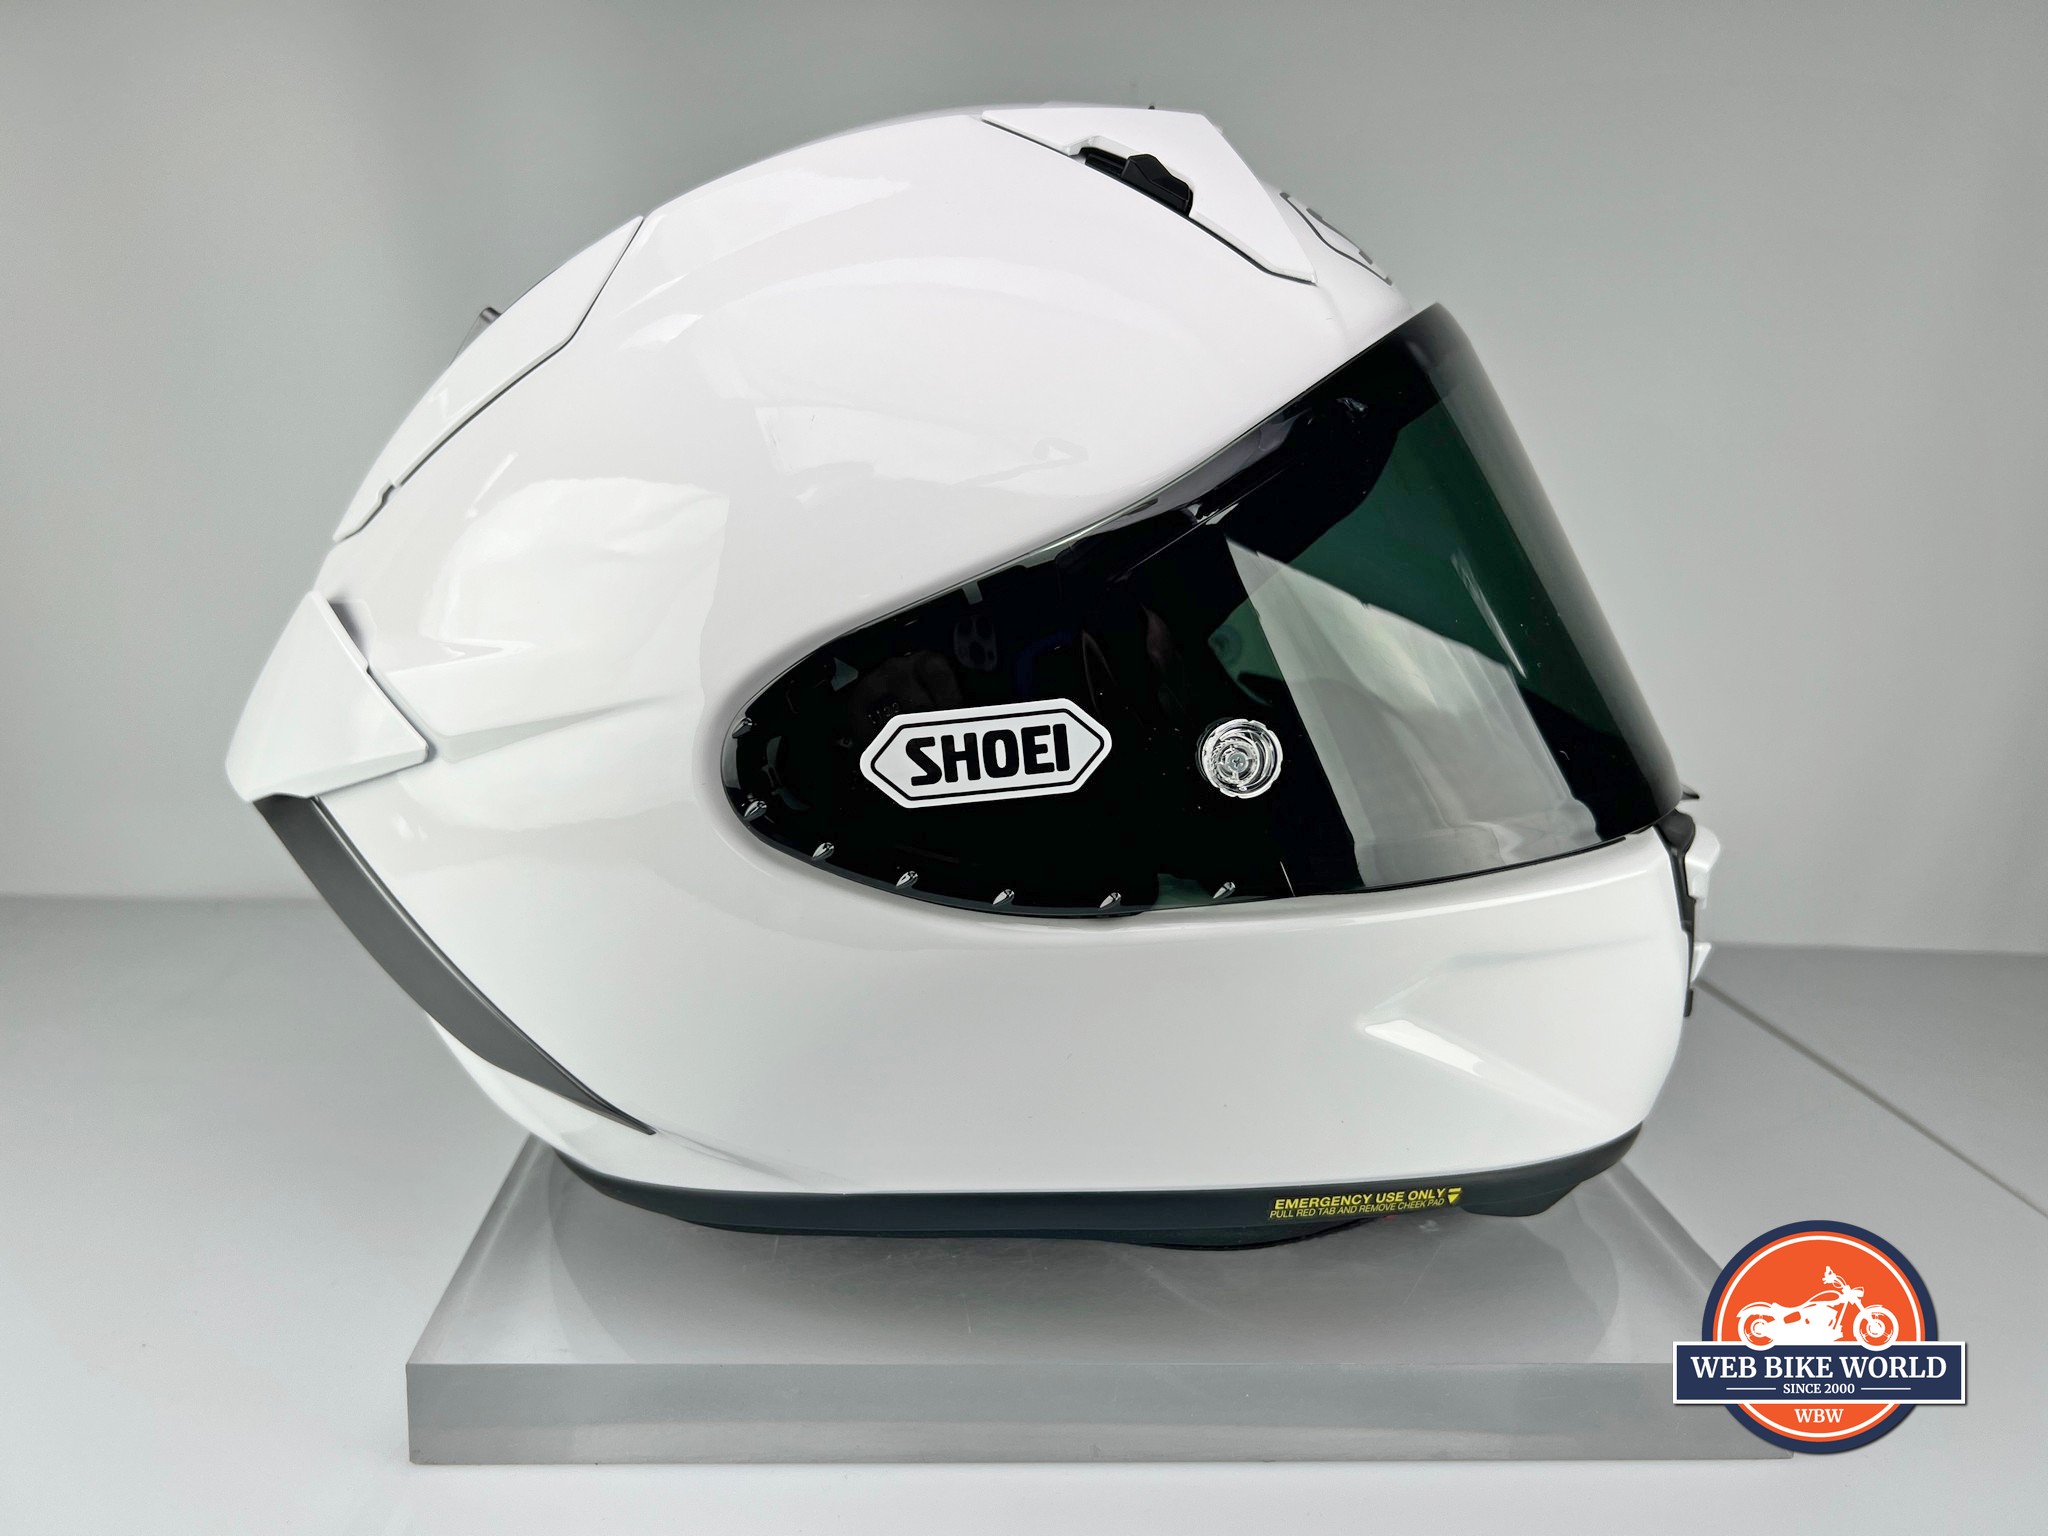 The side view of the Shoei X-Fifteen.